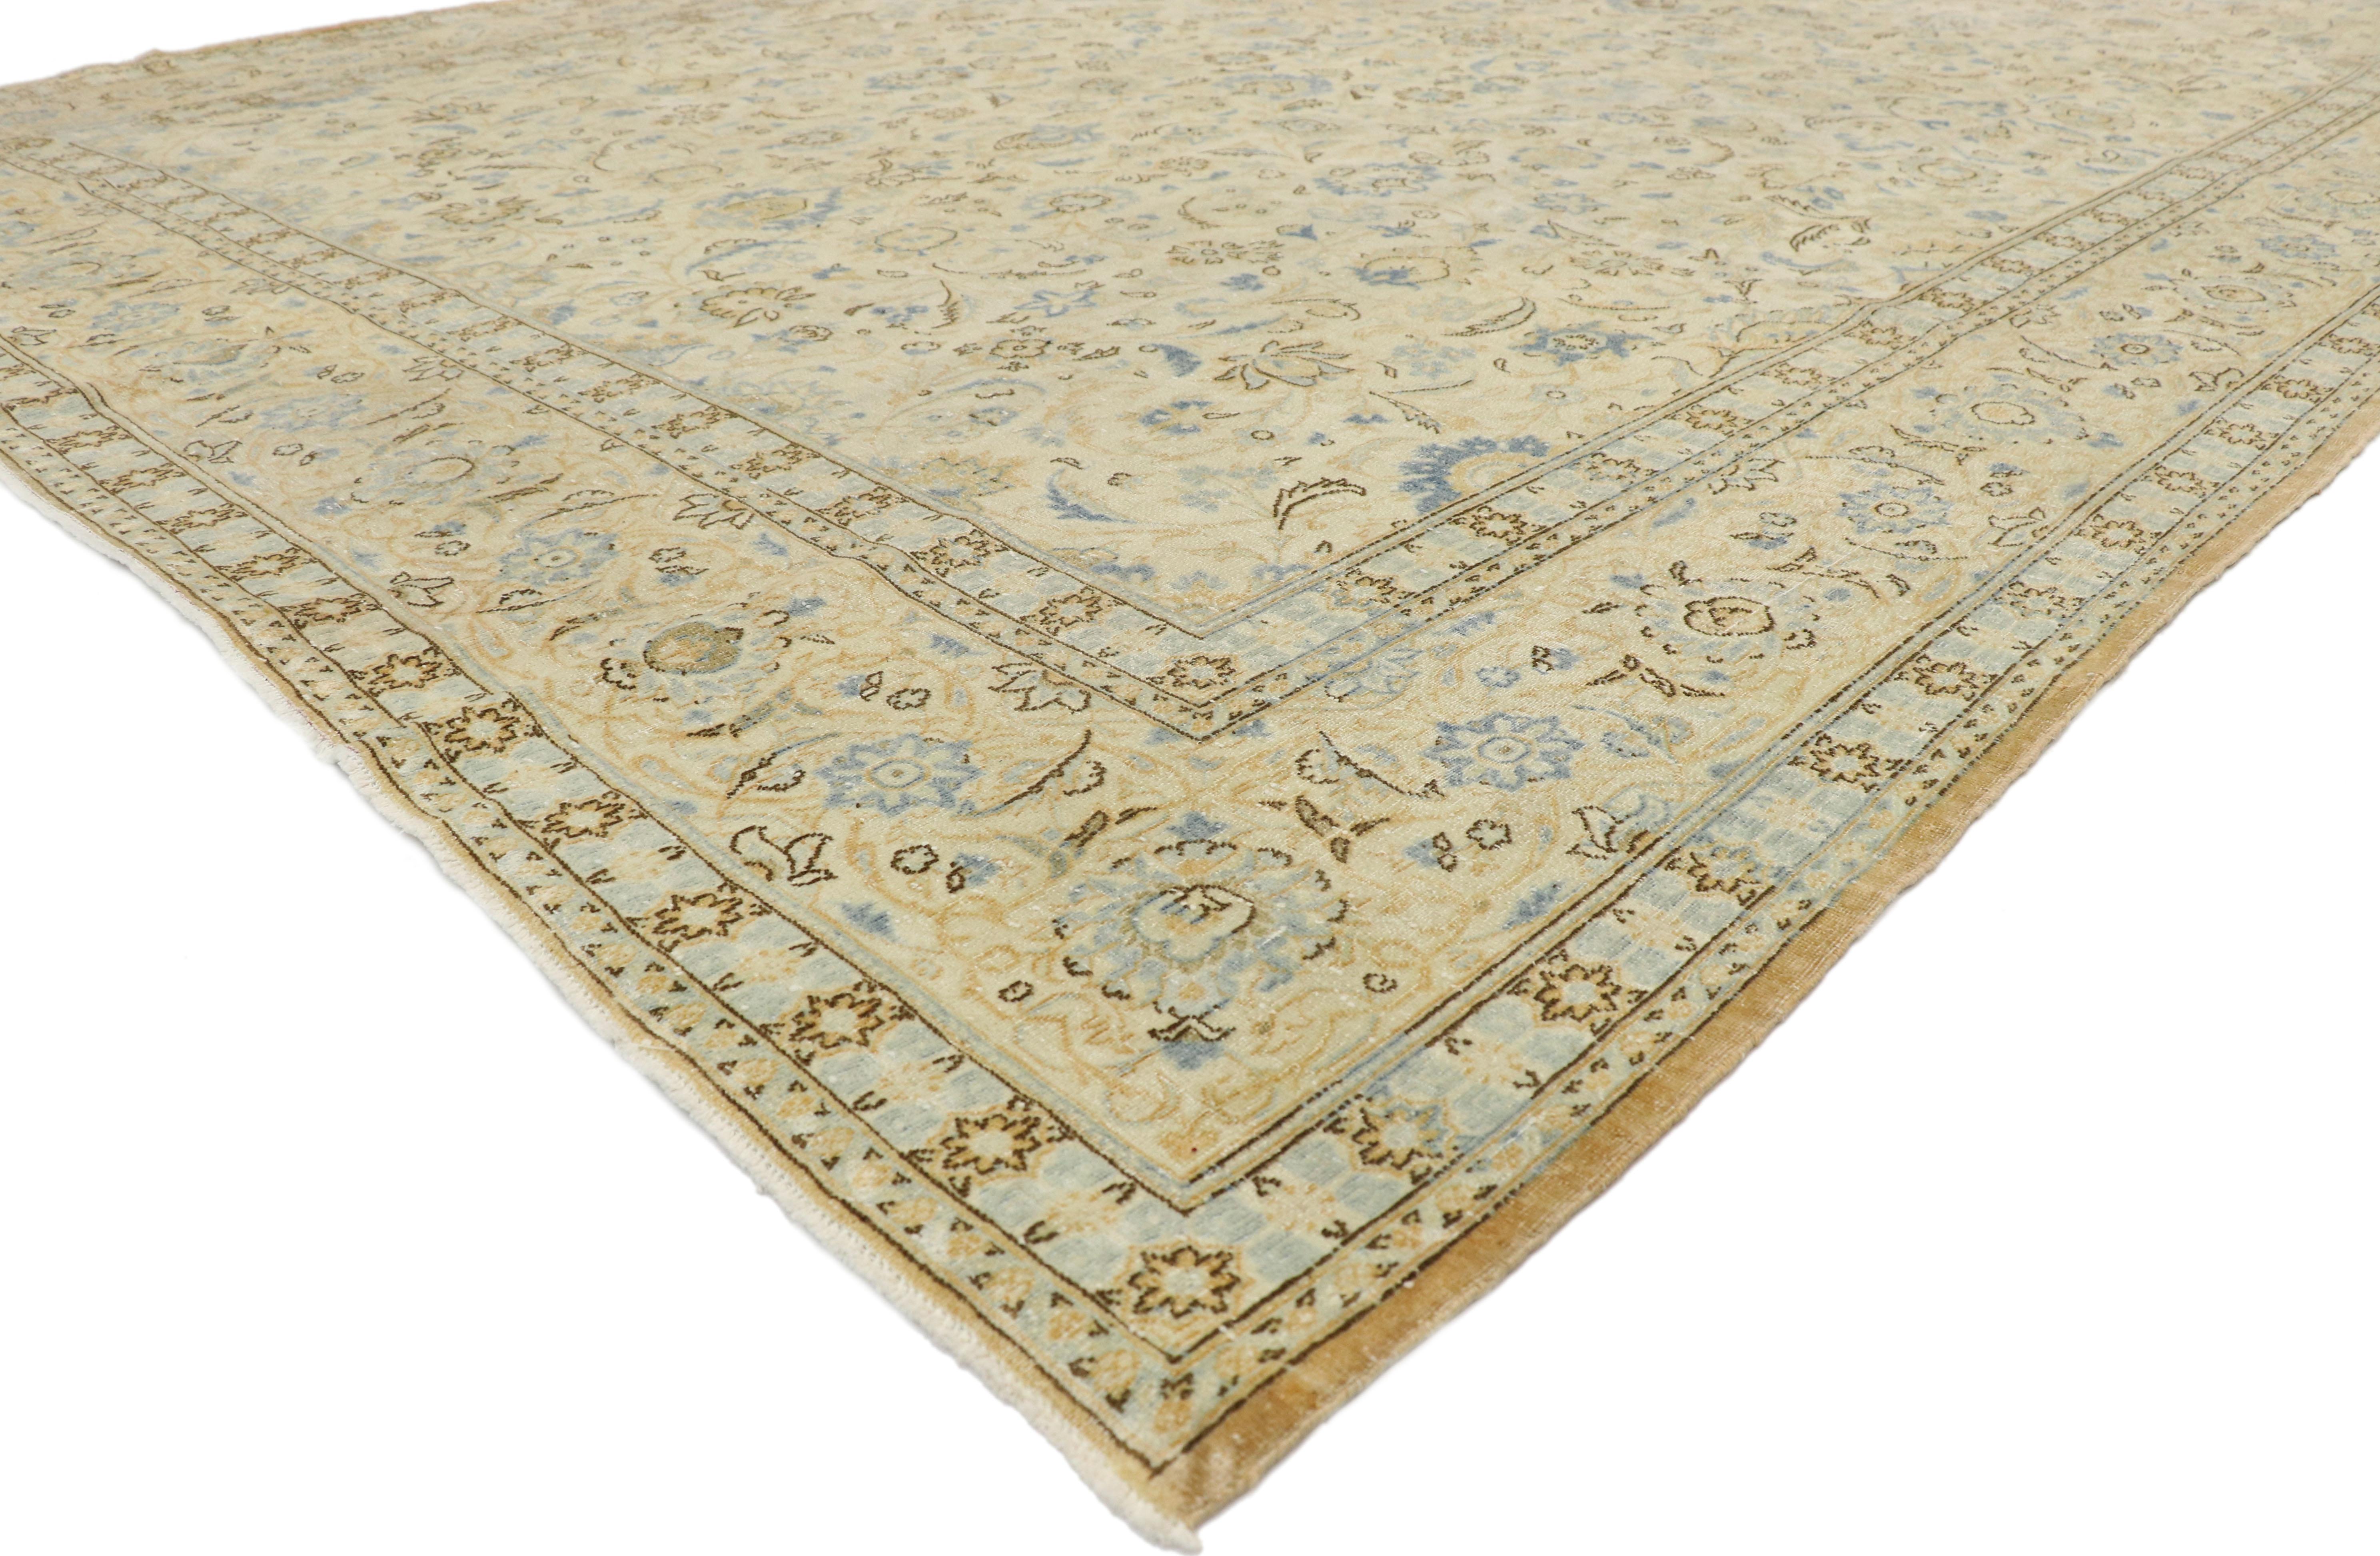 52843 Distressed Antique Persian Kashan Rug with Cotswold English Manor Style 08'07 x 12'08. With a timeless floral pattern and lovingly timeworn appearance, this hand knotted wool distressed antique Persian Kashan rug charms with ease and